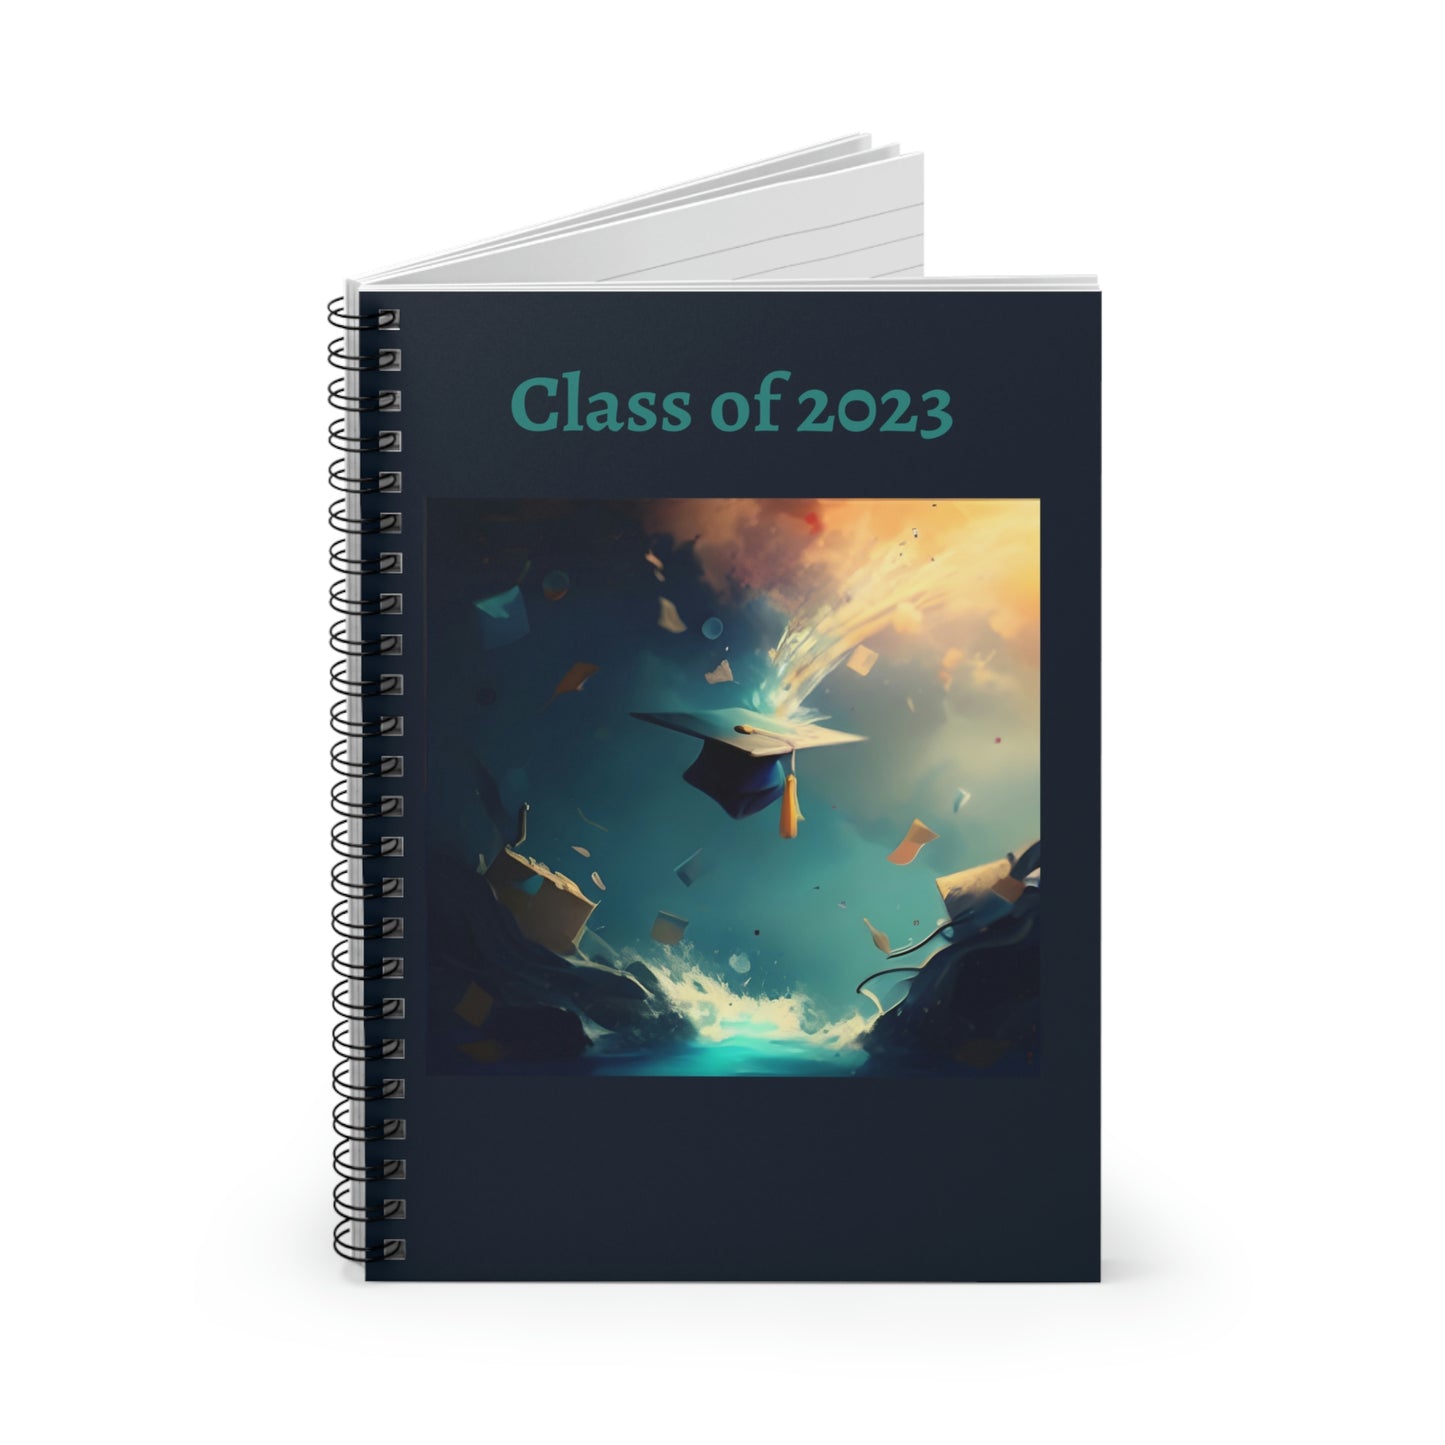 Class of 2023 Graduate Journal - Ruled Line (Cap and Blues)